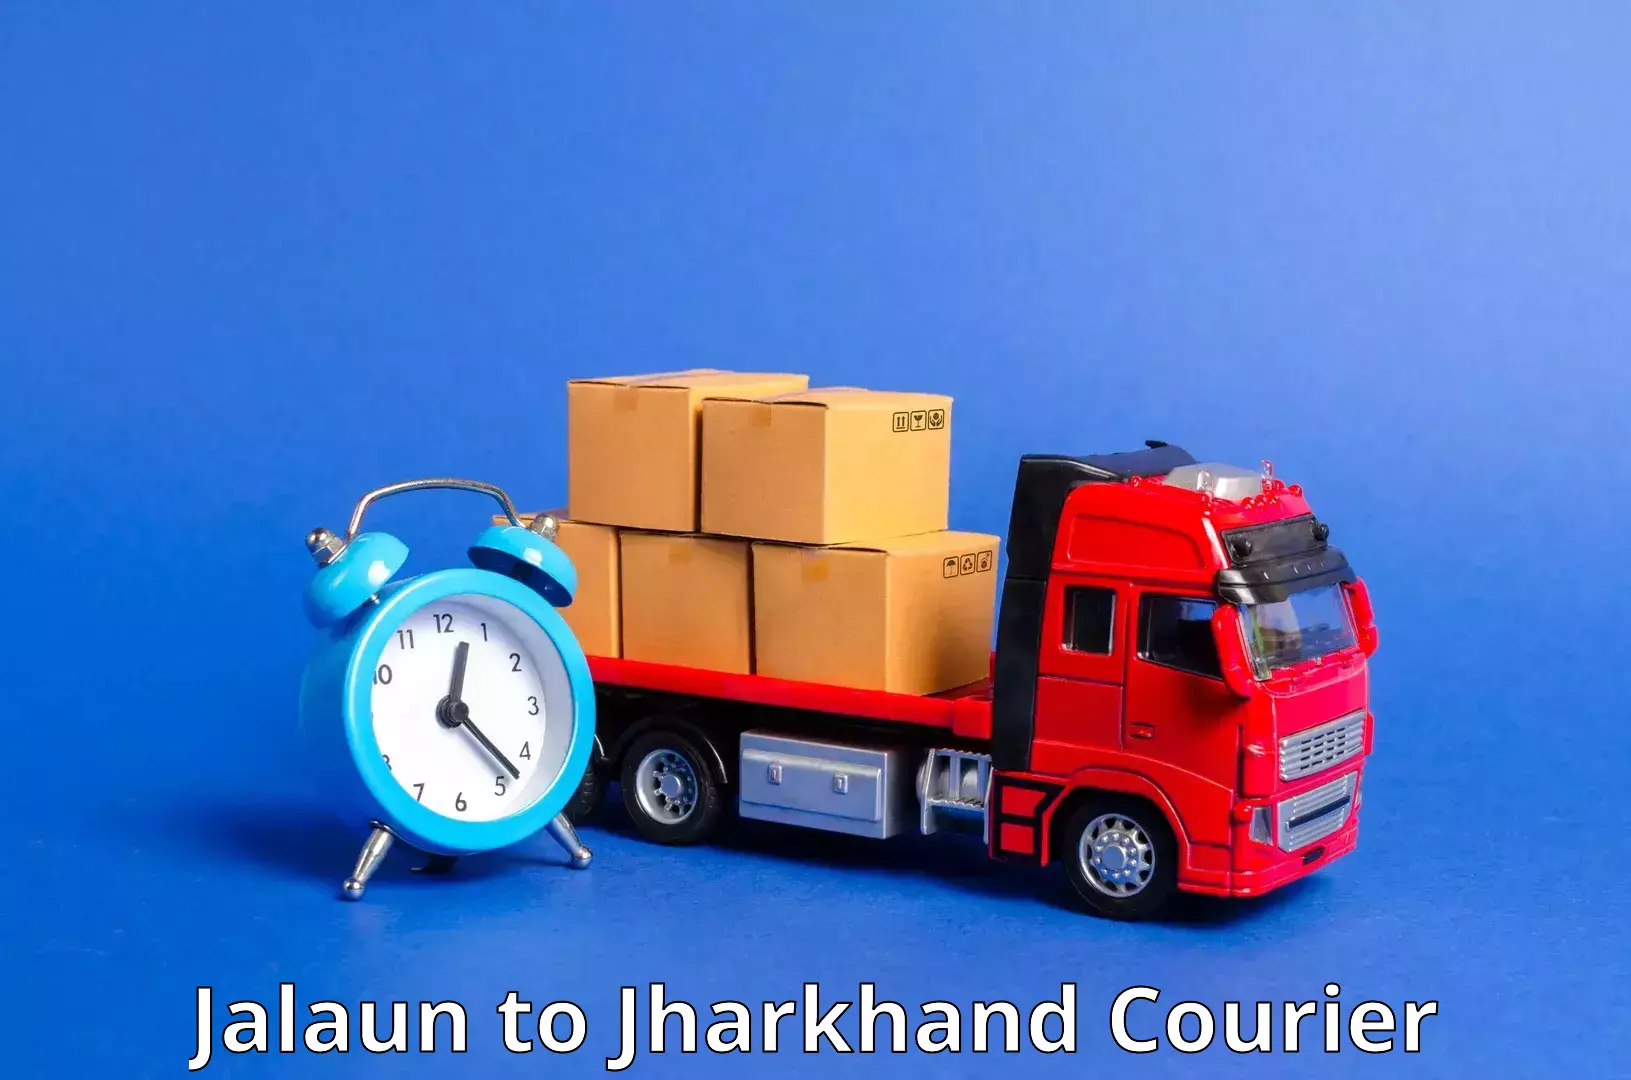 Package delivery network Jalaun to Isri